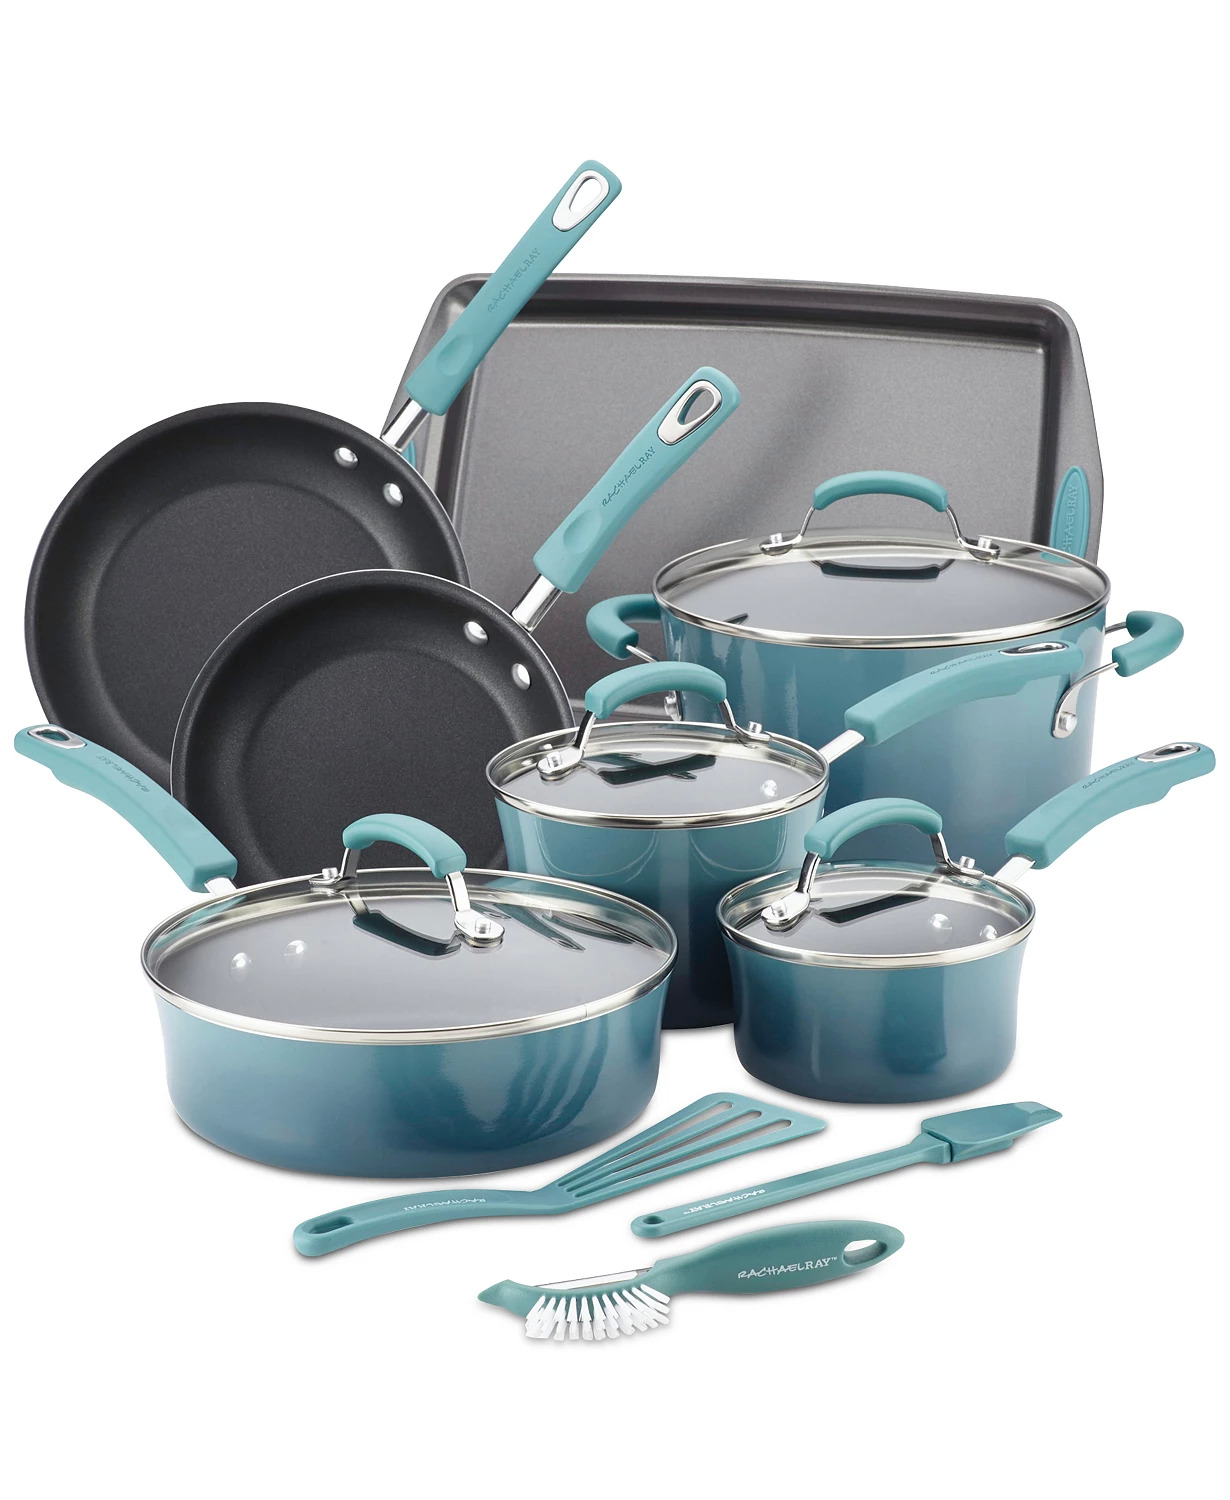 14-Piece Rachael Ray Nonstick Cookware Set (3 colors) $56 after 30% Slickdeals Cashback (PC Req'd) + free shipping